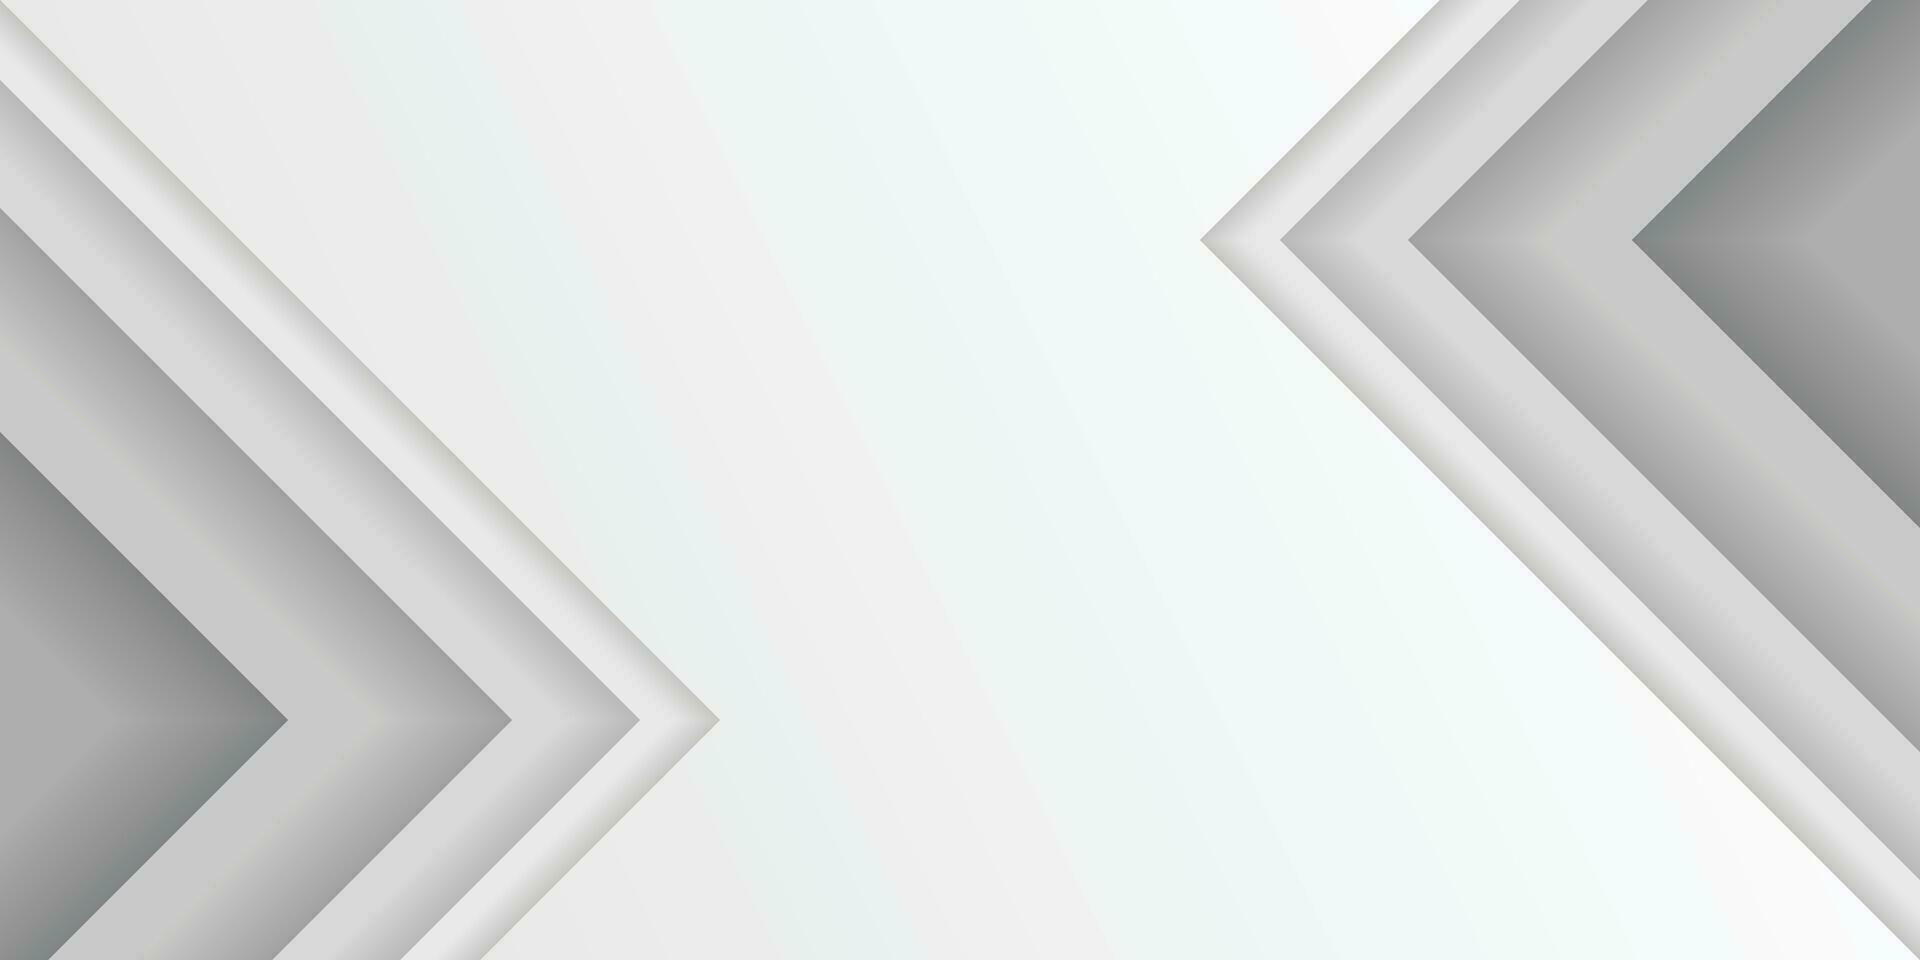 Gray multilayered right triangle. White gradient paper cut abstract background. Design element for template, card, cover, banner, poster, backdrop, wall. Vector illustration.